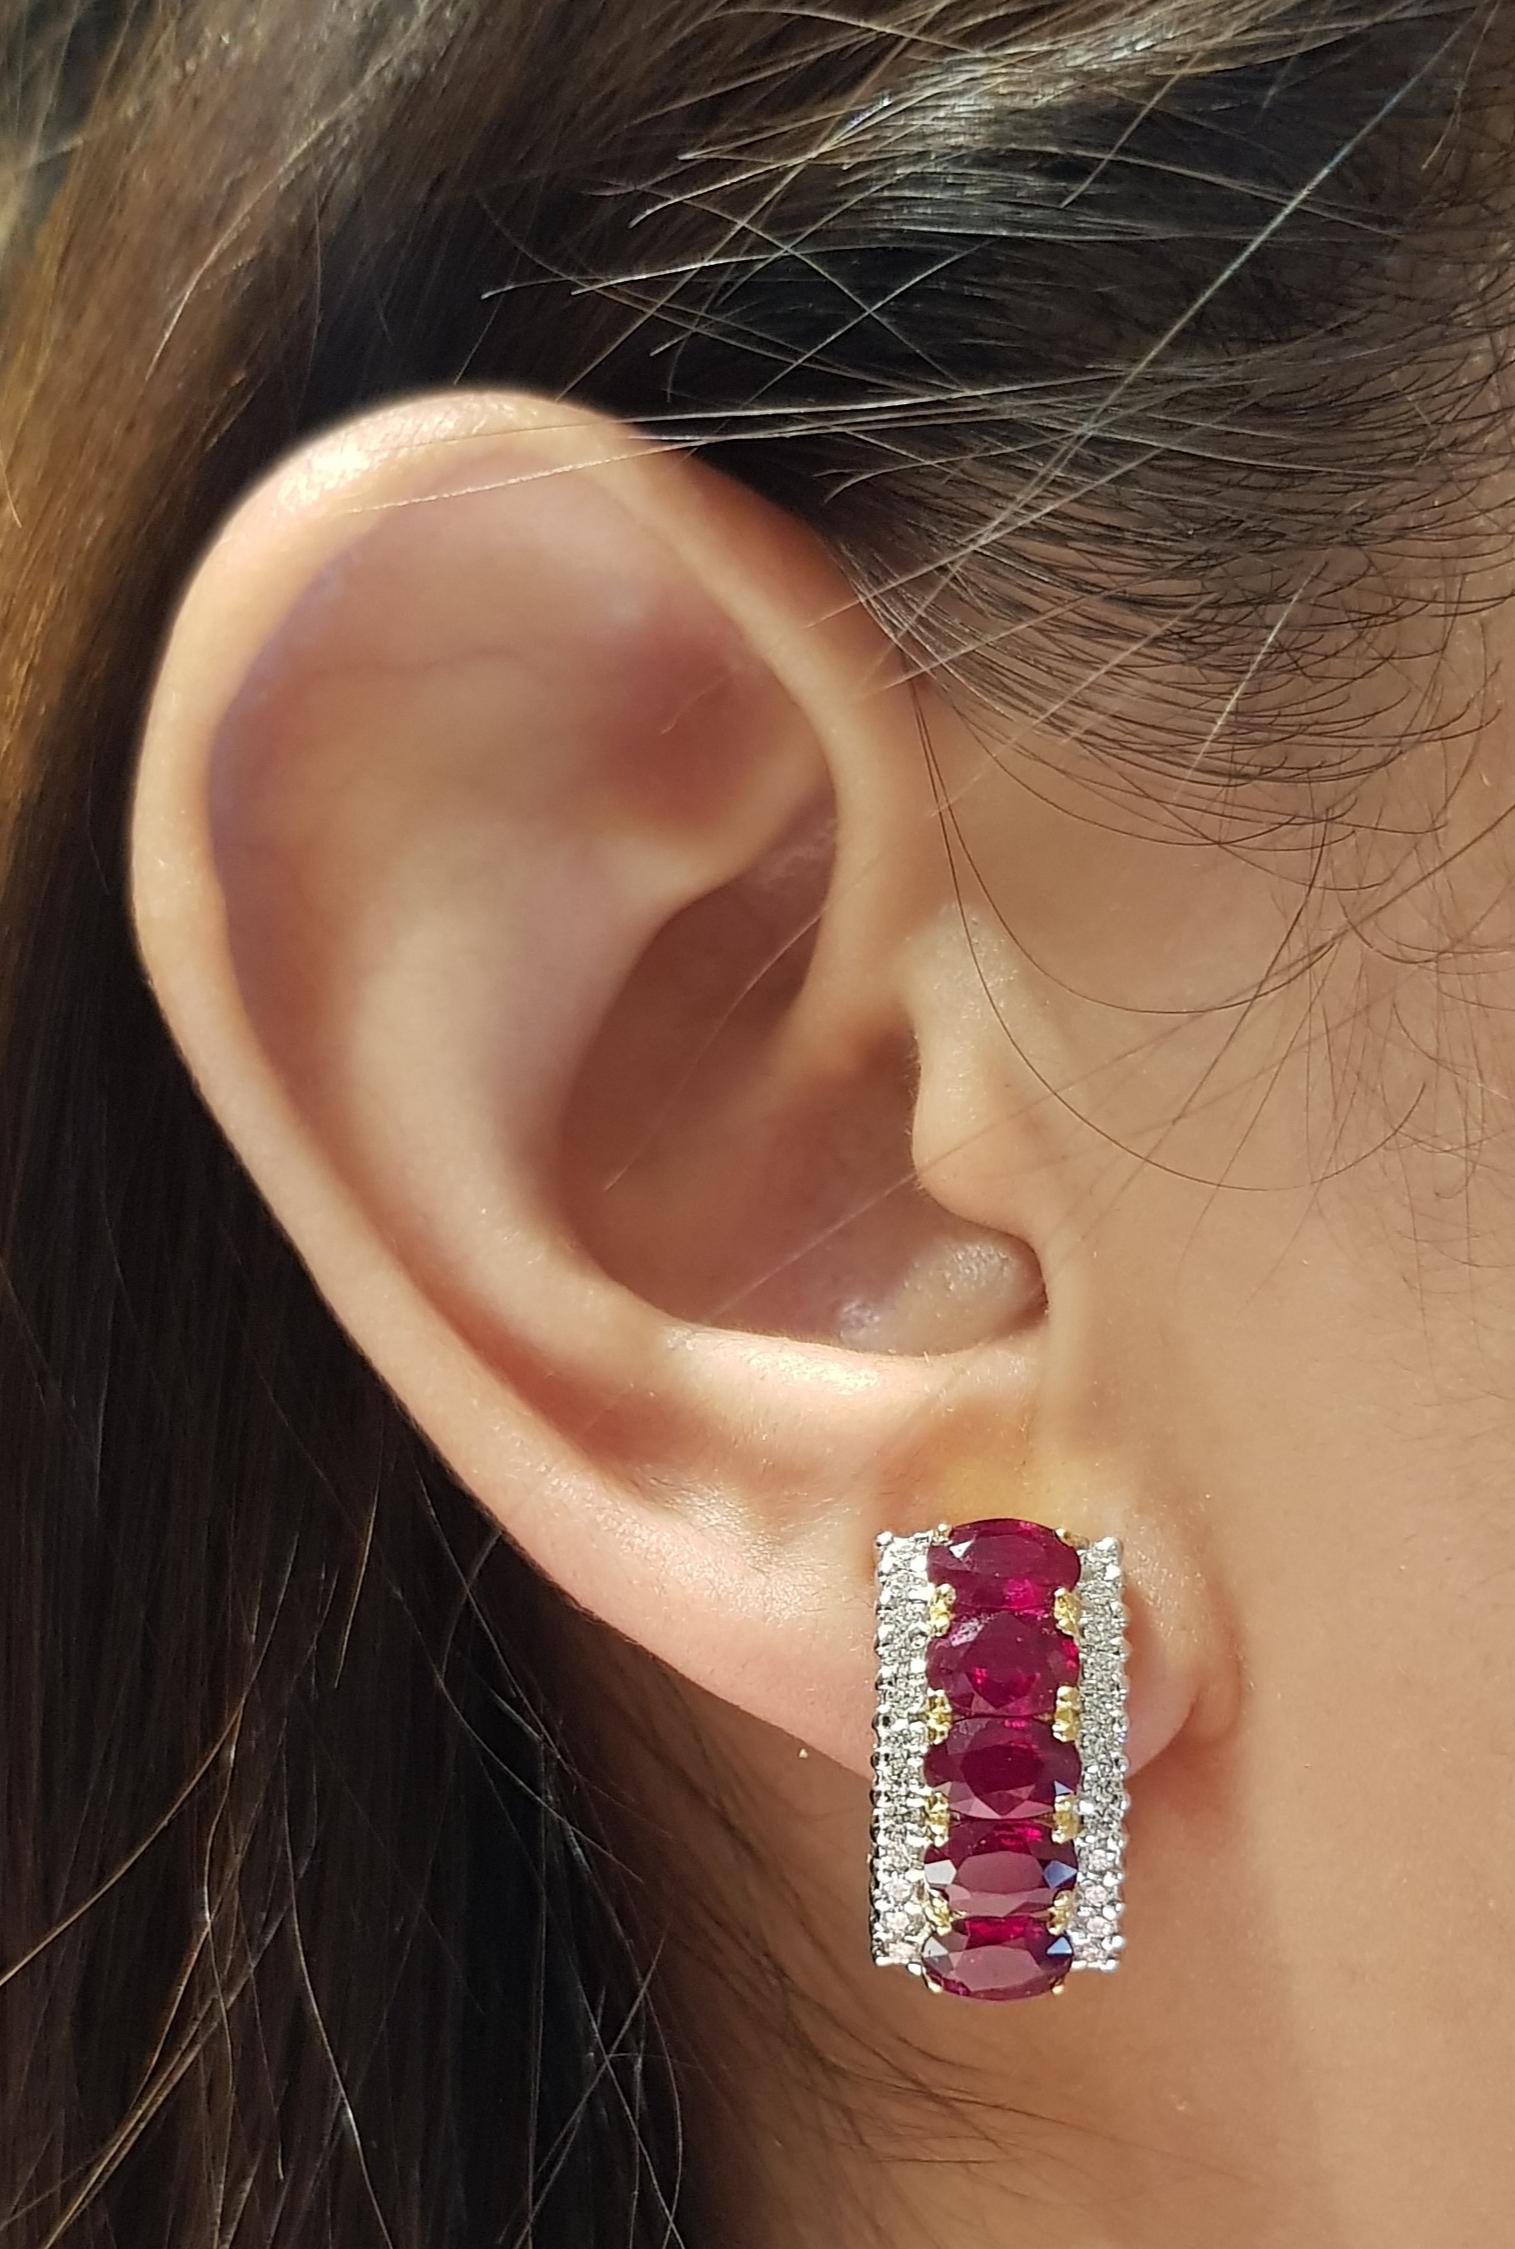 Ruby 5.52 carats with Diamond 0.58 carat Earrings set in 18 Karat Gold Settings

Width:  1.0 cm 
Length: 1.7 cm
Total Weight: 11.44 grams

